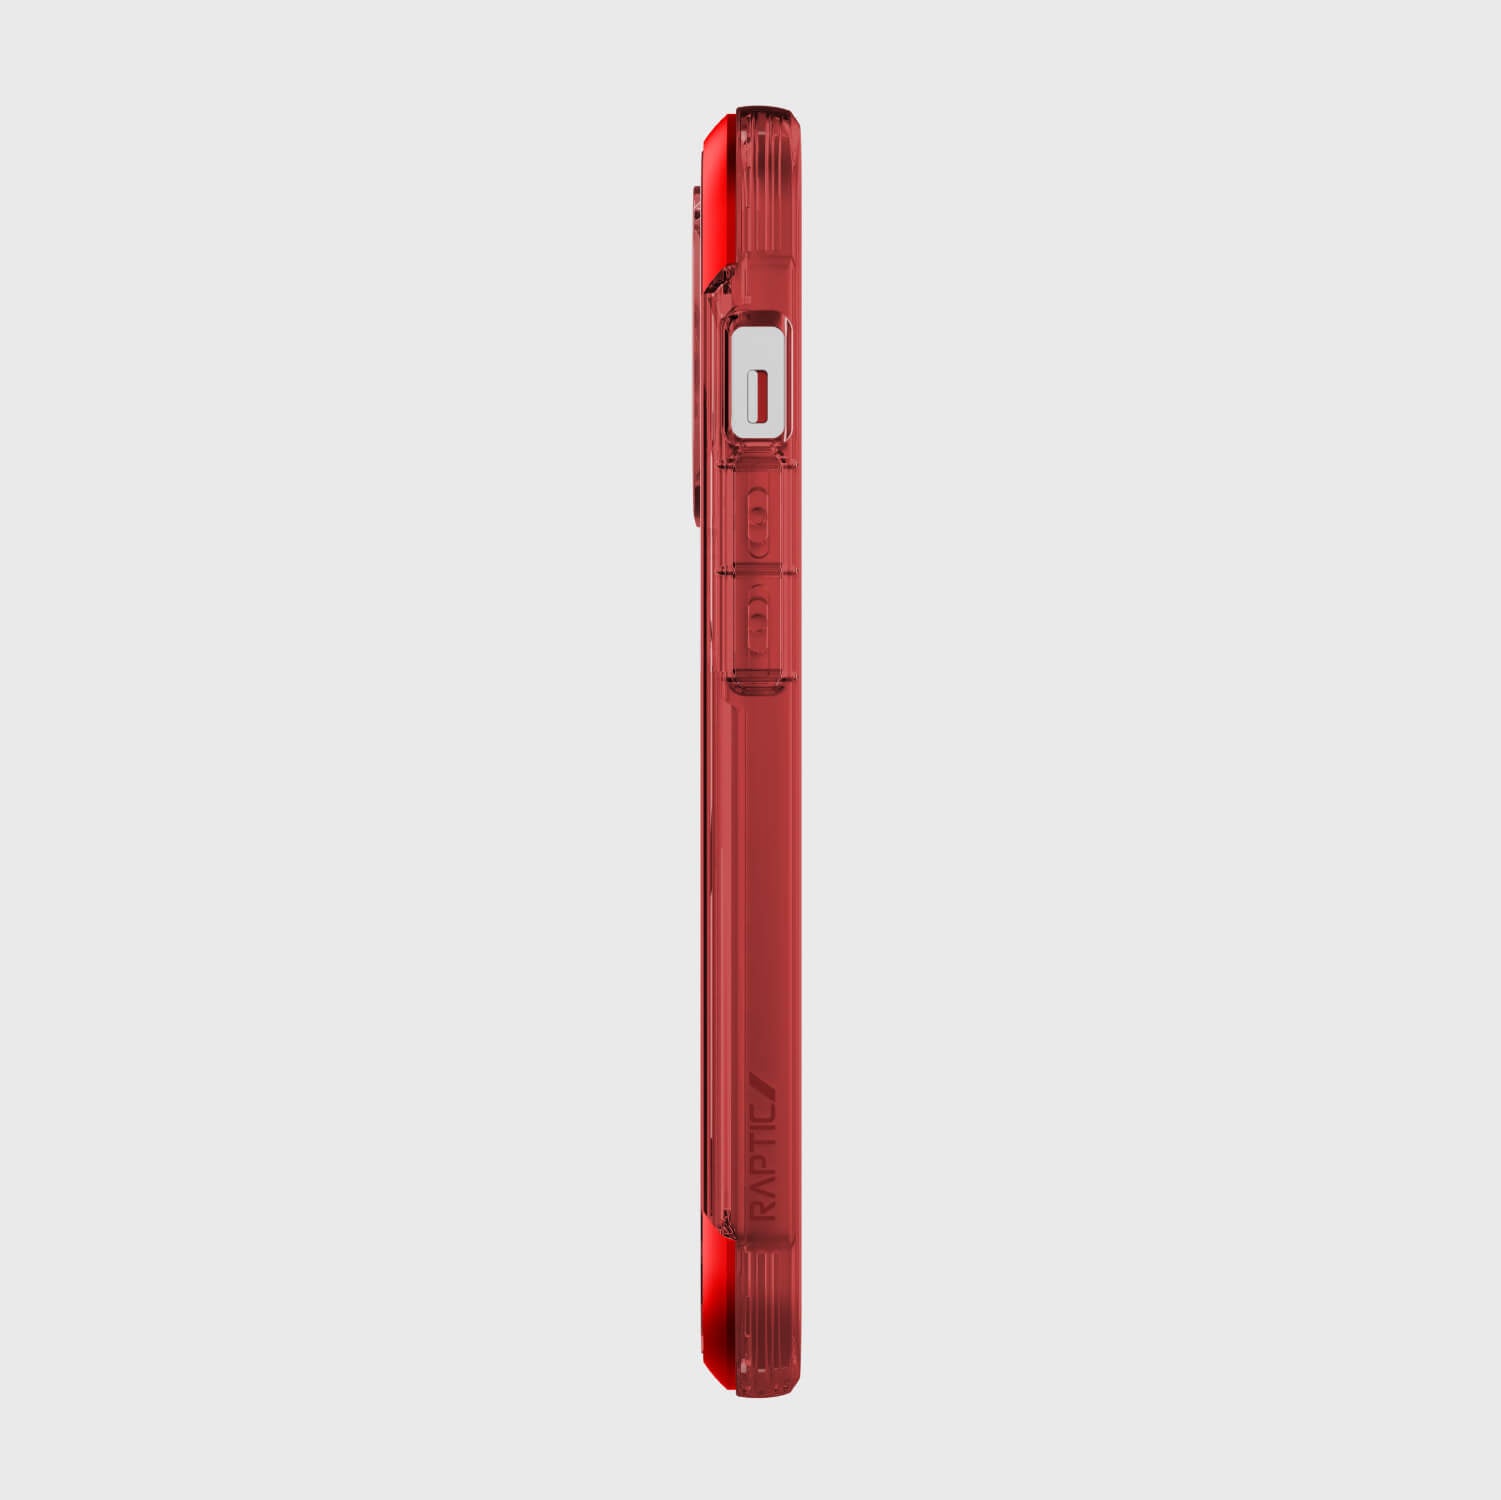 A drop-proof red Raptic iPhone 13 Pro Case - AIR with wireless charging compatibility on a white background.